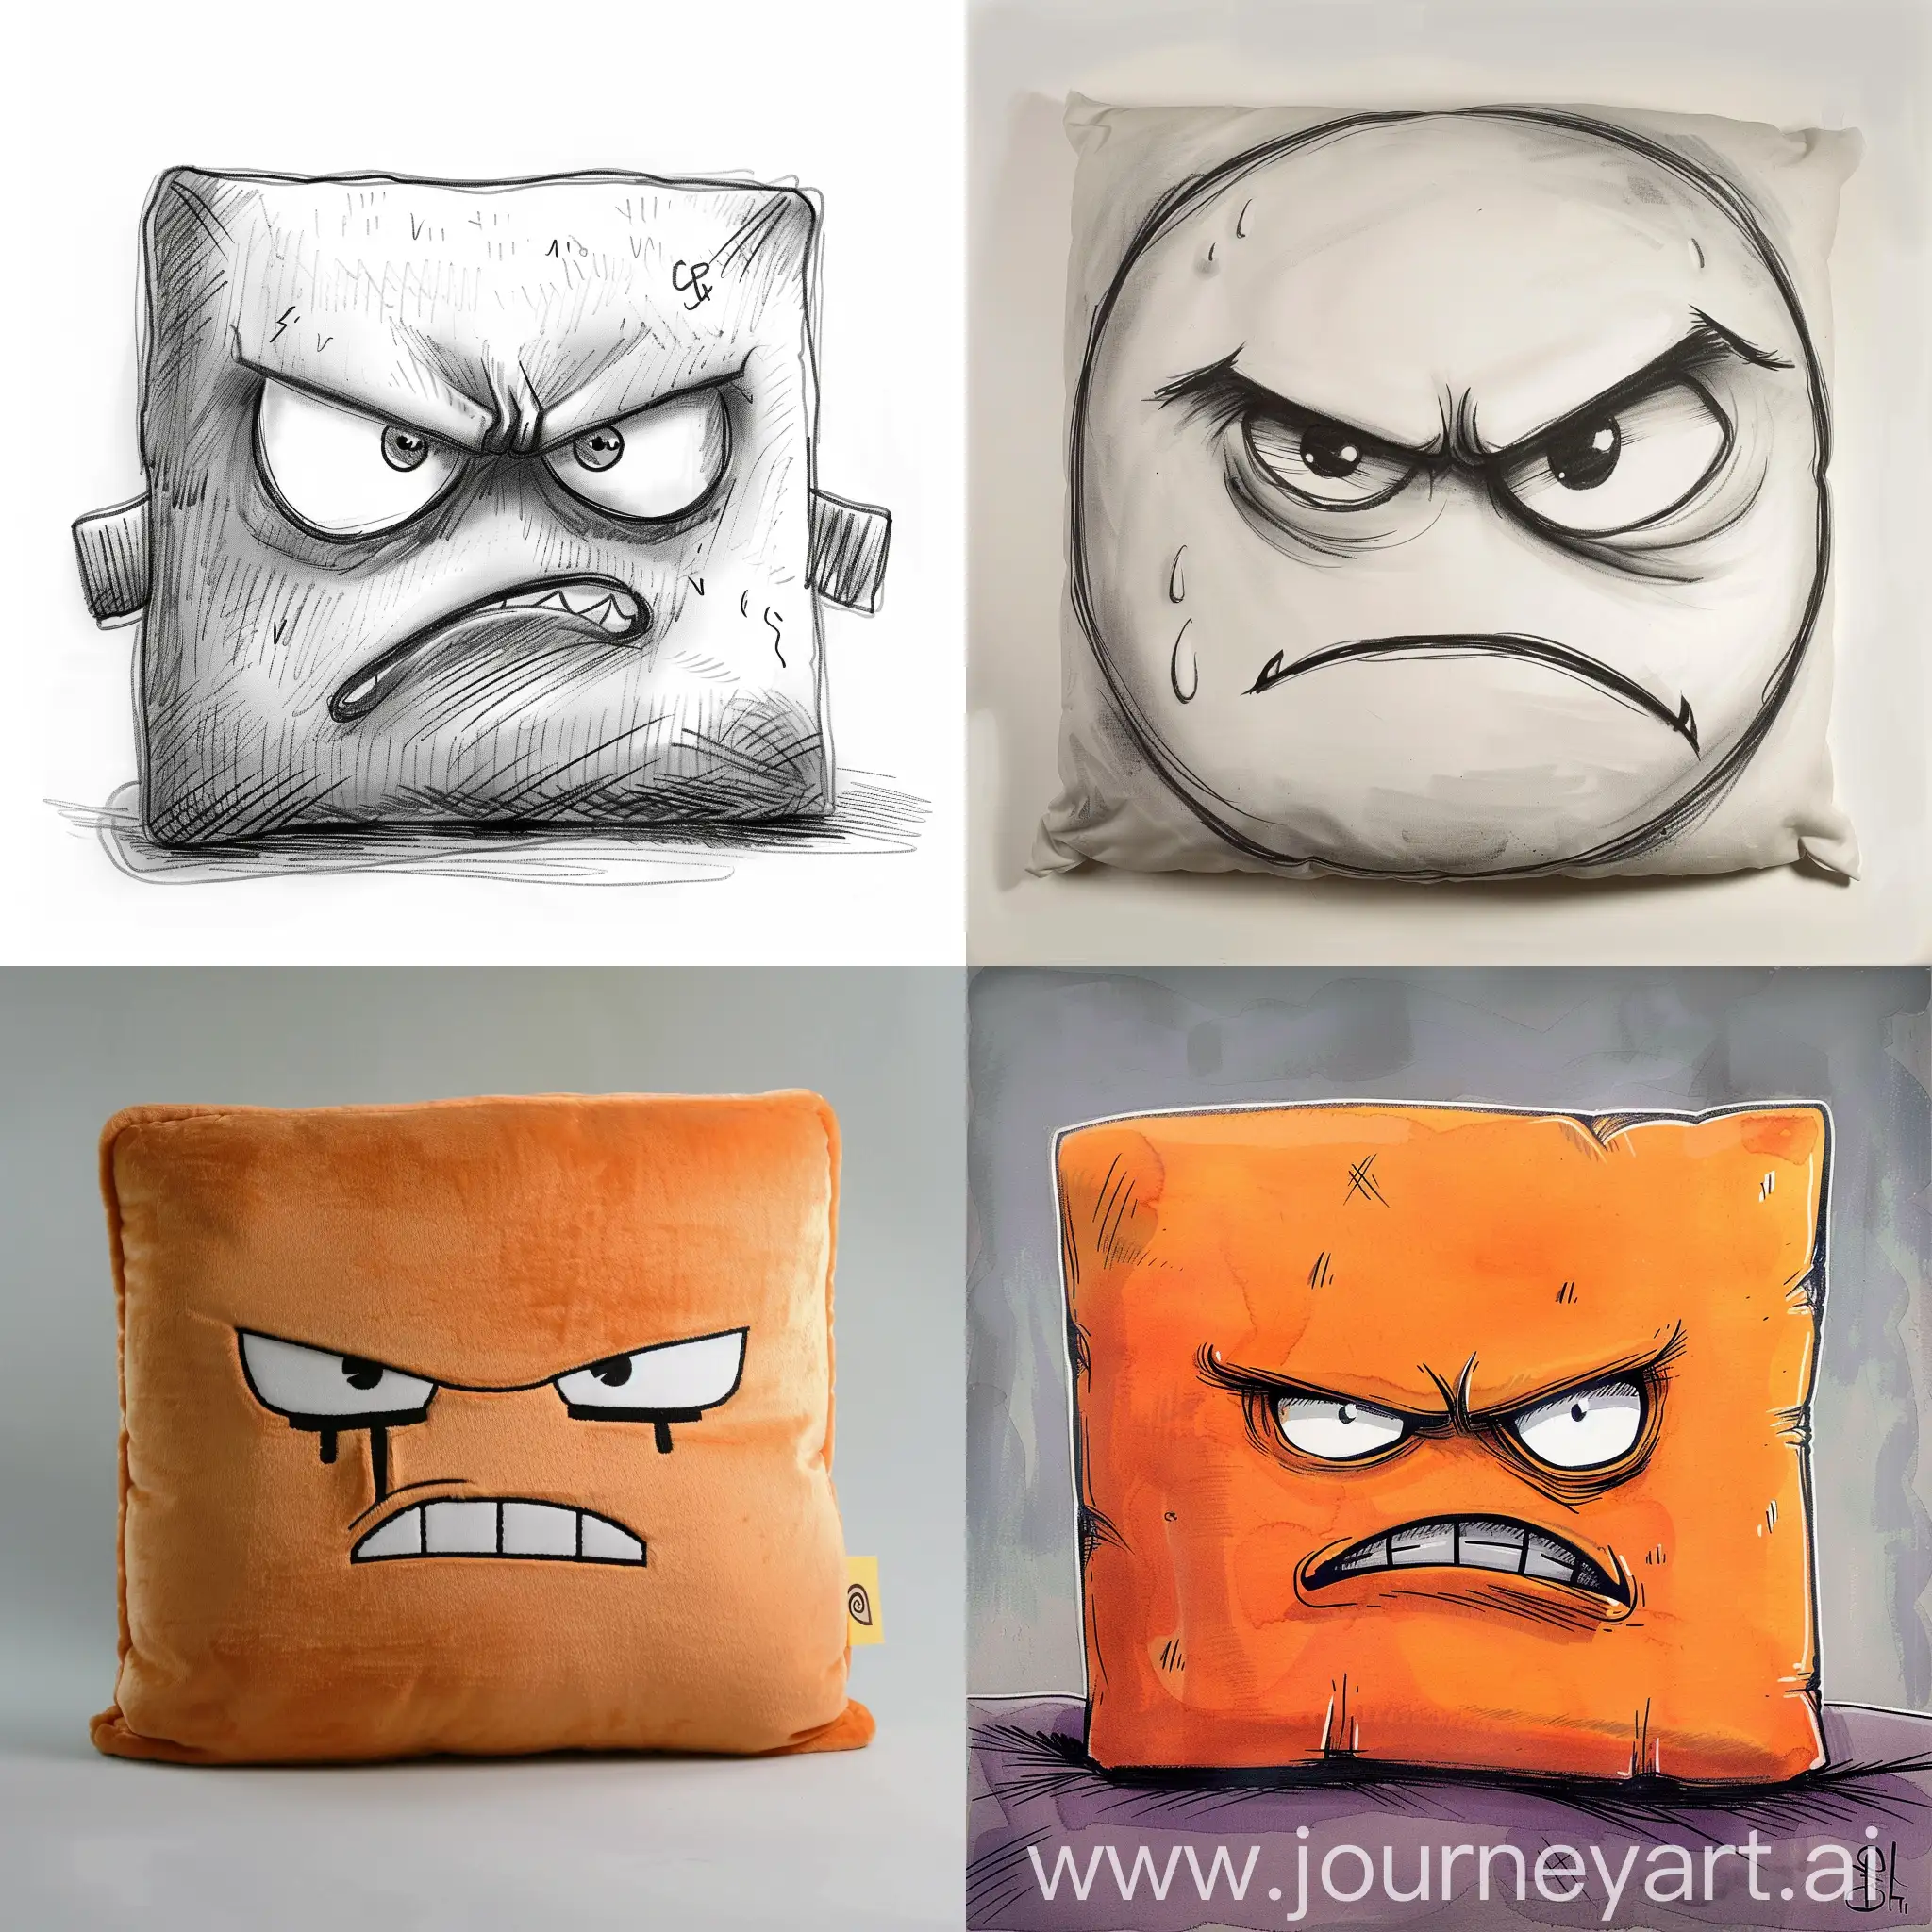 Angry-Pillow-Illustration-Vibrant-Expression-of-Emotion